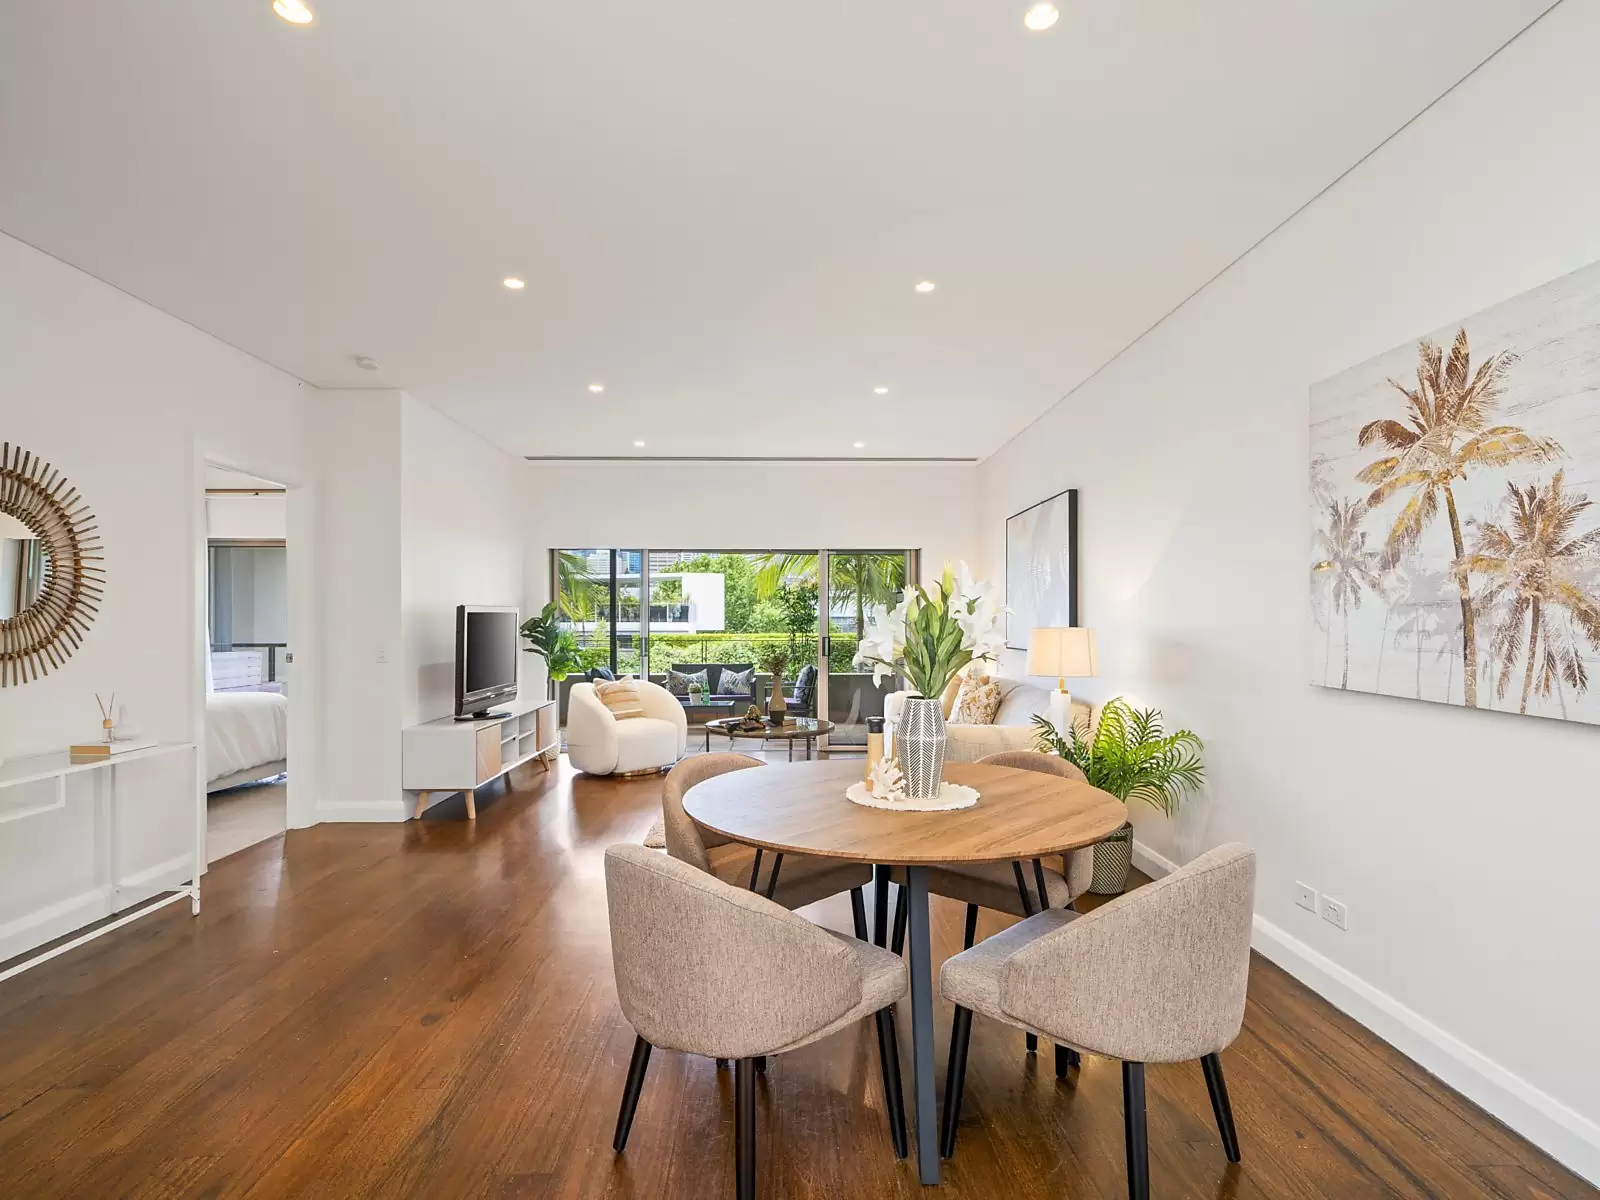 Photo #4: 48/67 Cowper Wharf Road, Woolloomooloo - Auction by Sydney Sotheby's International Realty